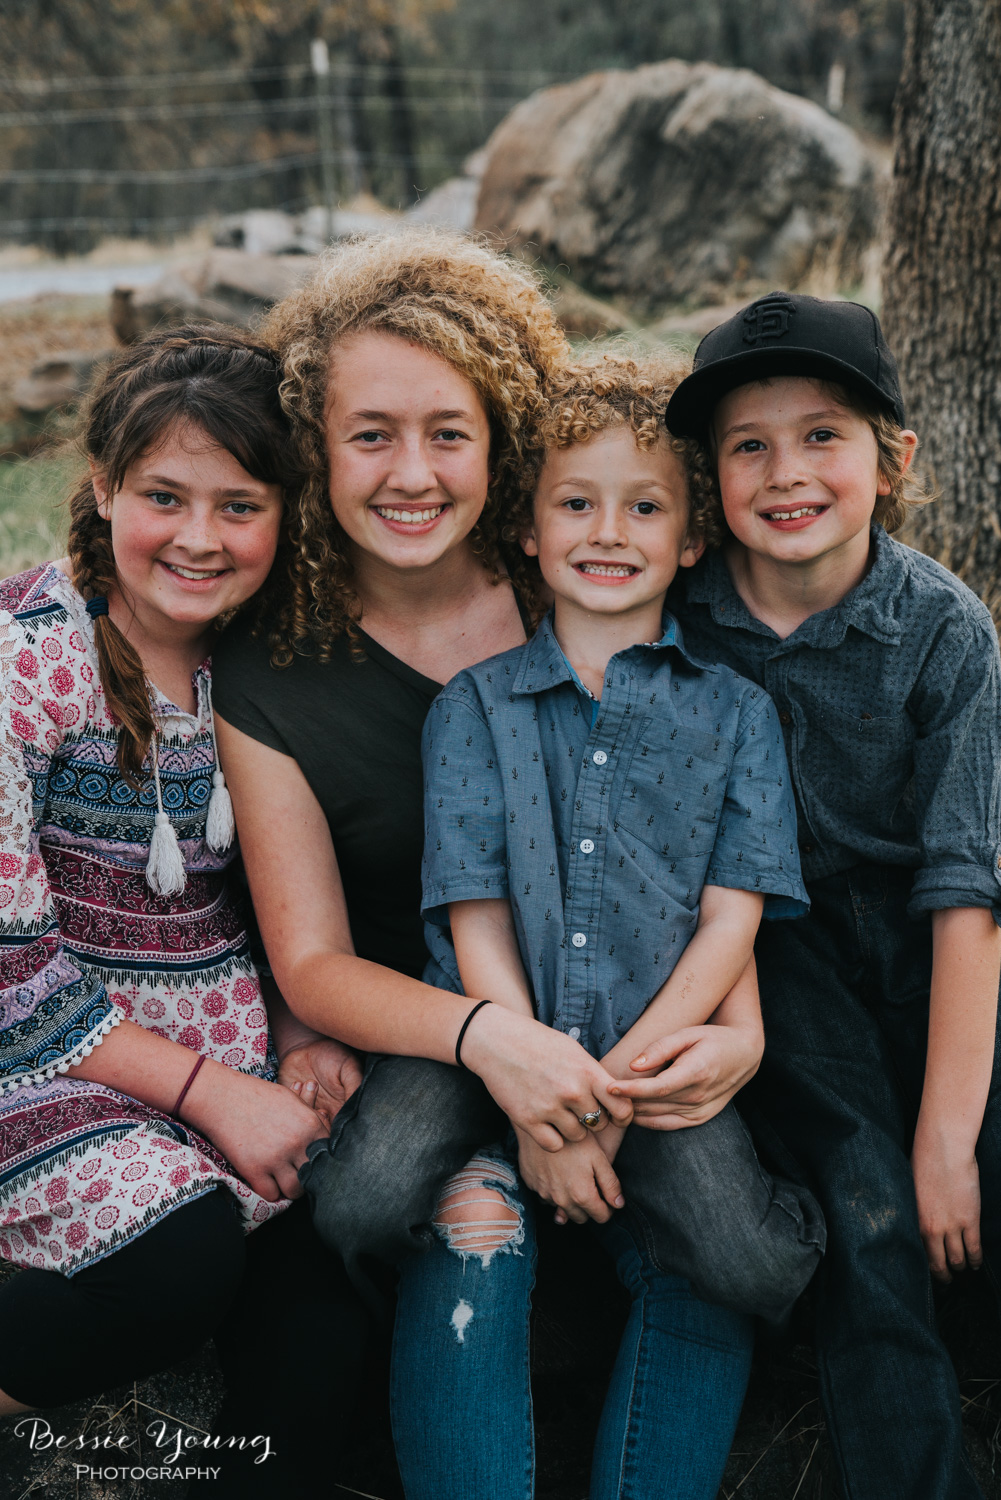 Sonora Family Portraits - Sonora Photographer Bessie Young - 4 sibling posing guide